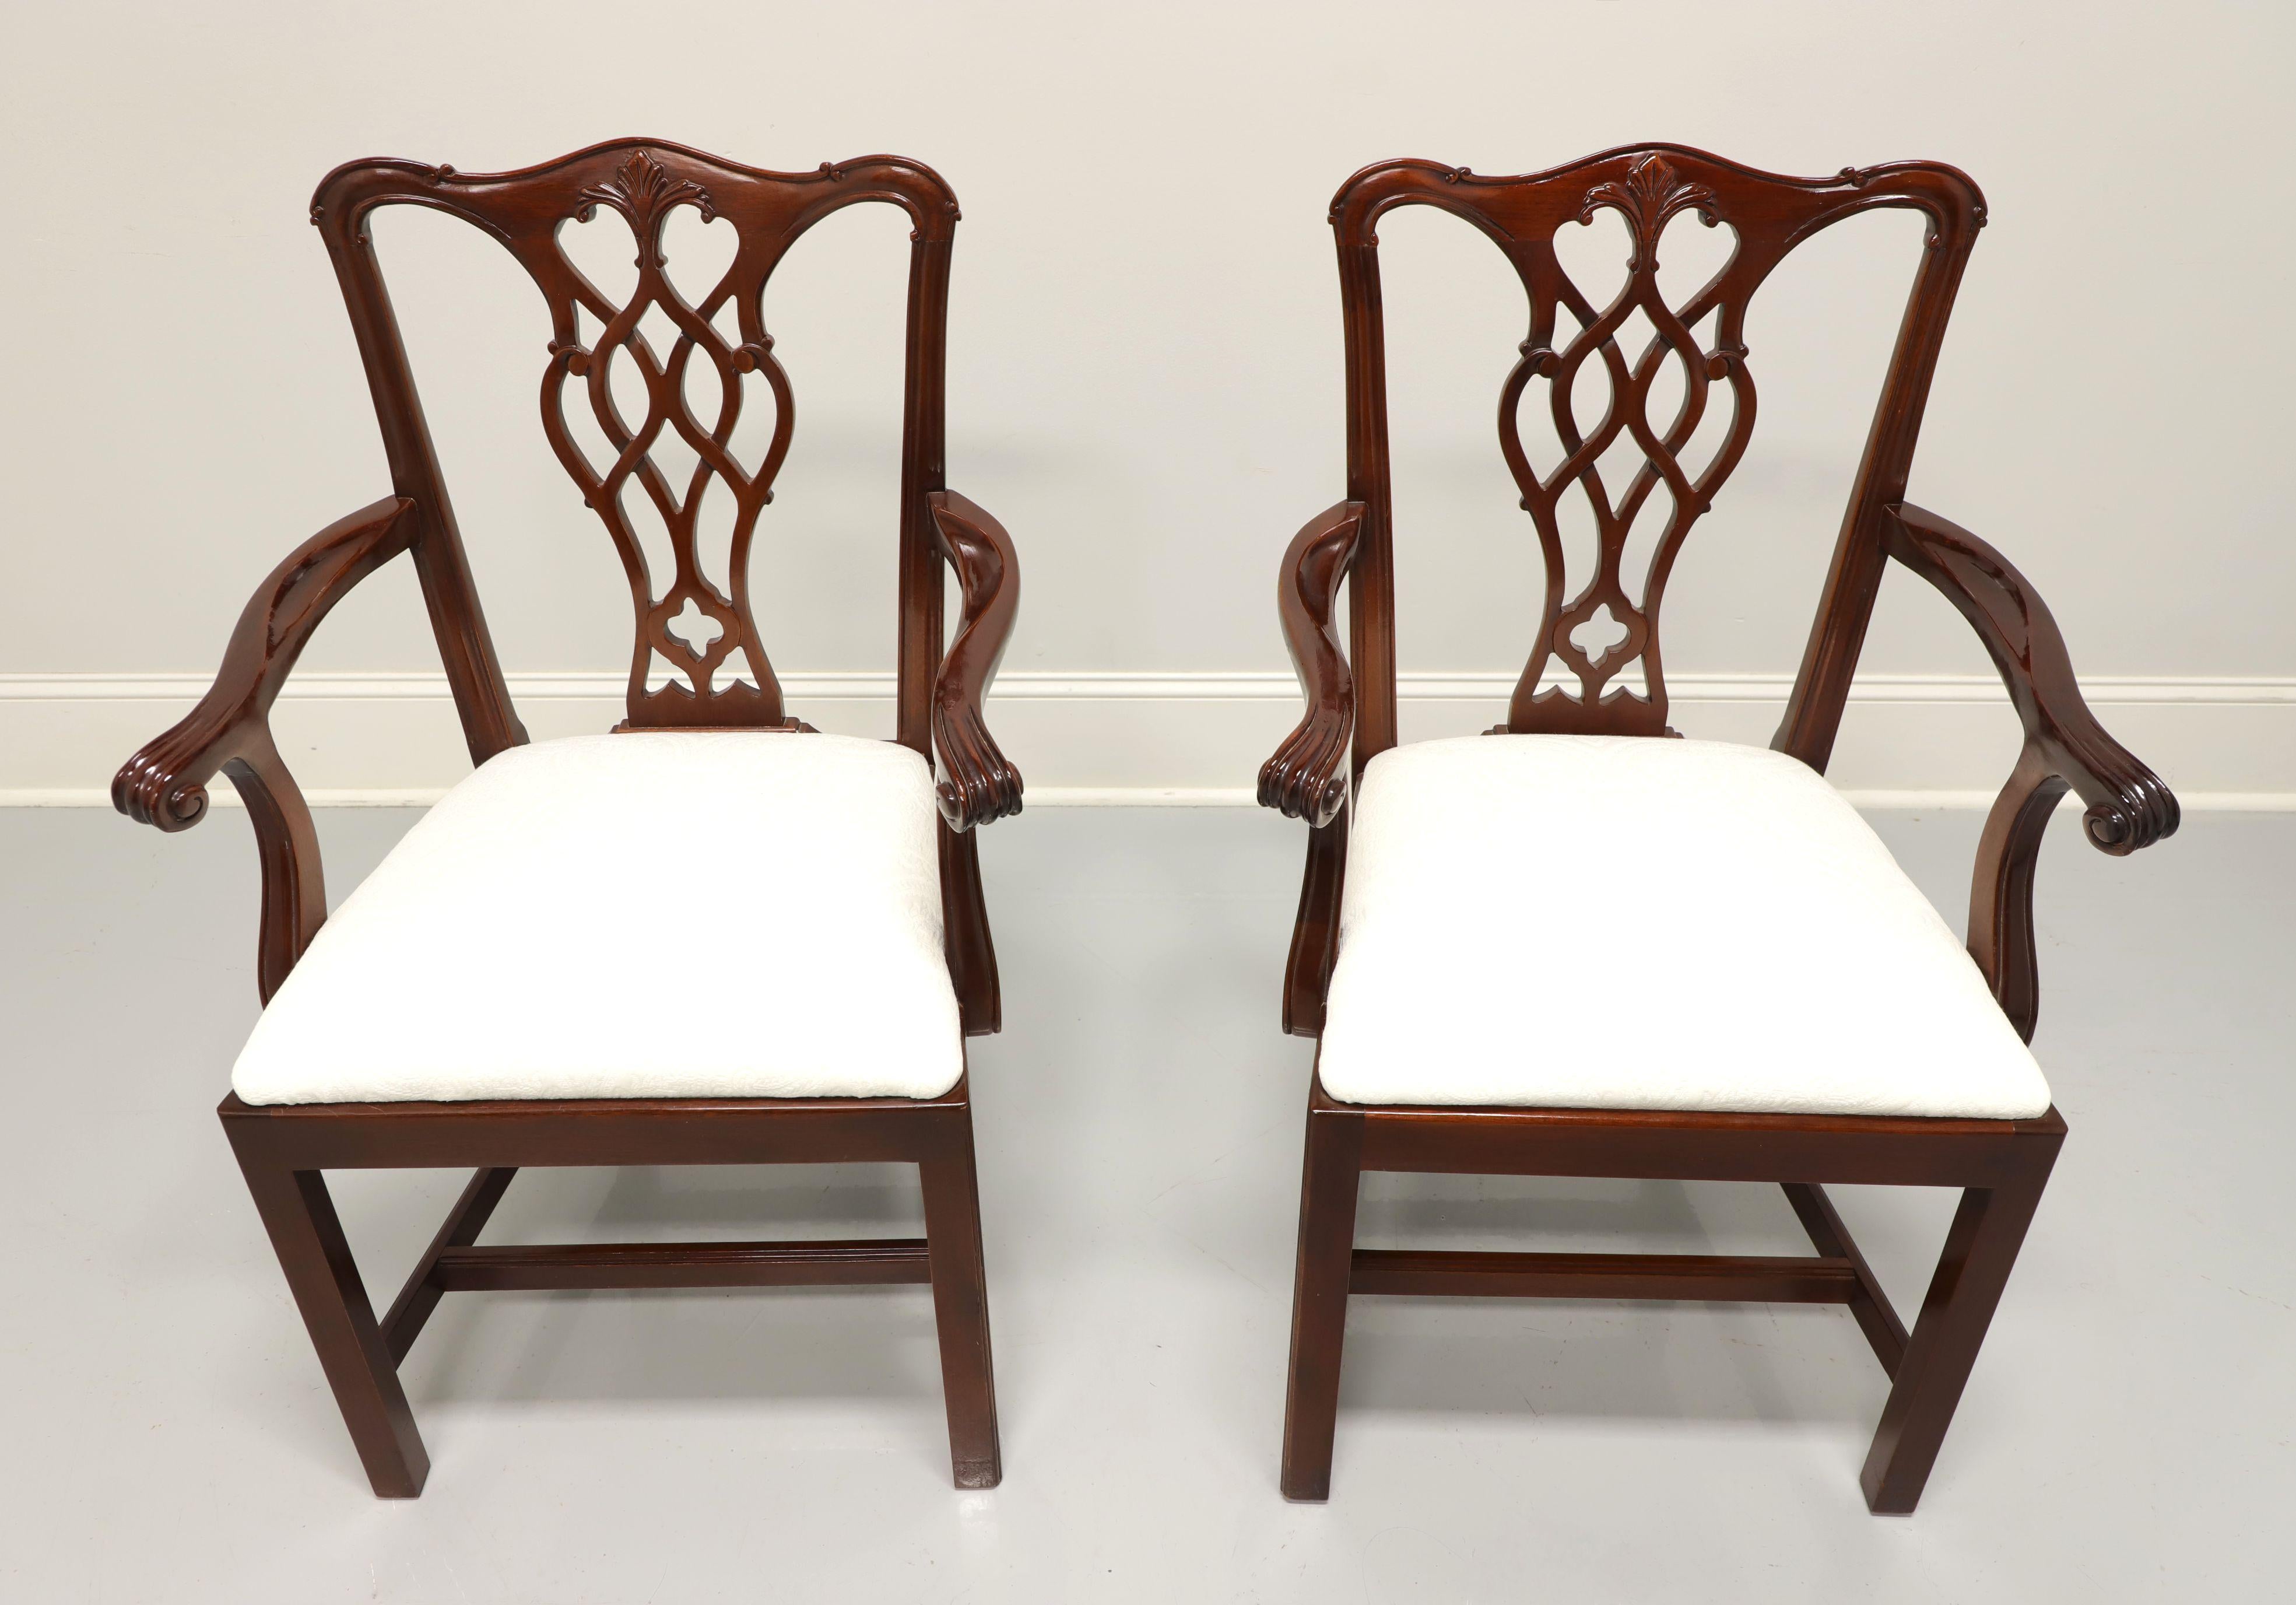 A pair of Chippendale style dining armchairs by Councill. Solid mahogany with carved crest rail, backsplat, scroll arms, straight legs and stretchers. Seats upholstered in a neutral cream colored brocade fabric. Made in the USA, in the late 20th